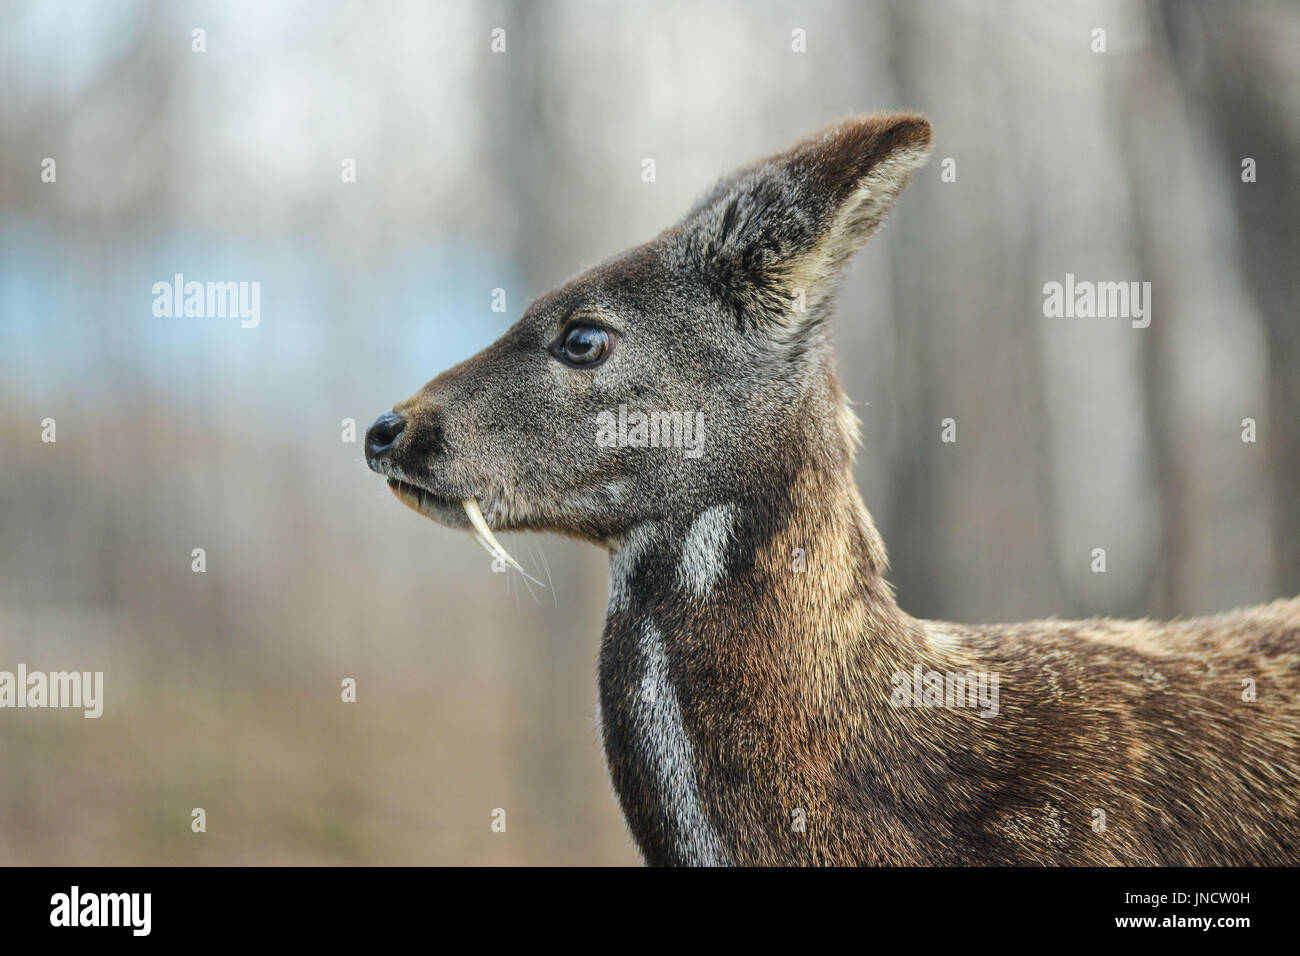 Deer Musk High Resolution Stock Photography and Images - Alamy